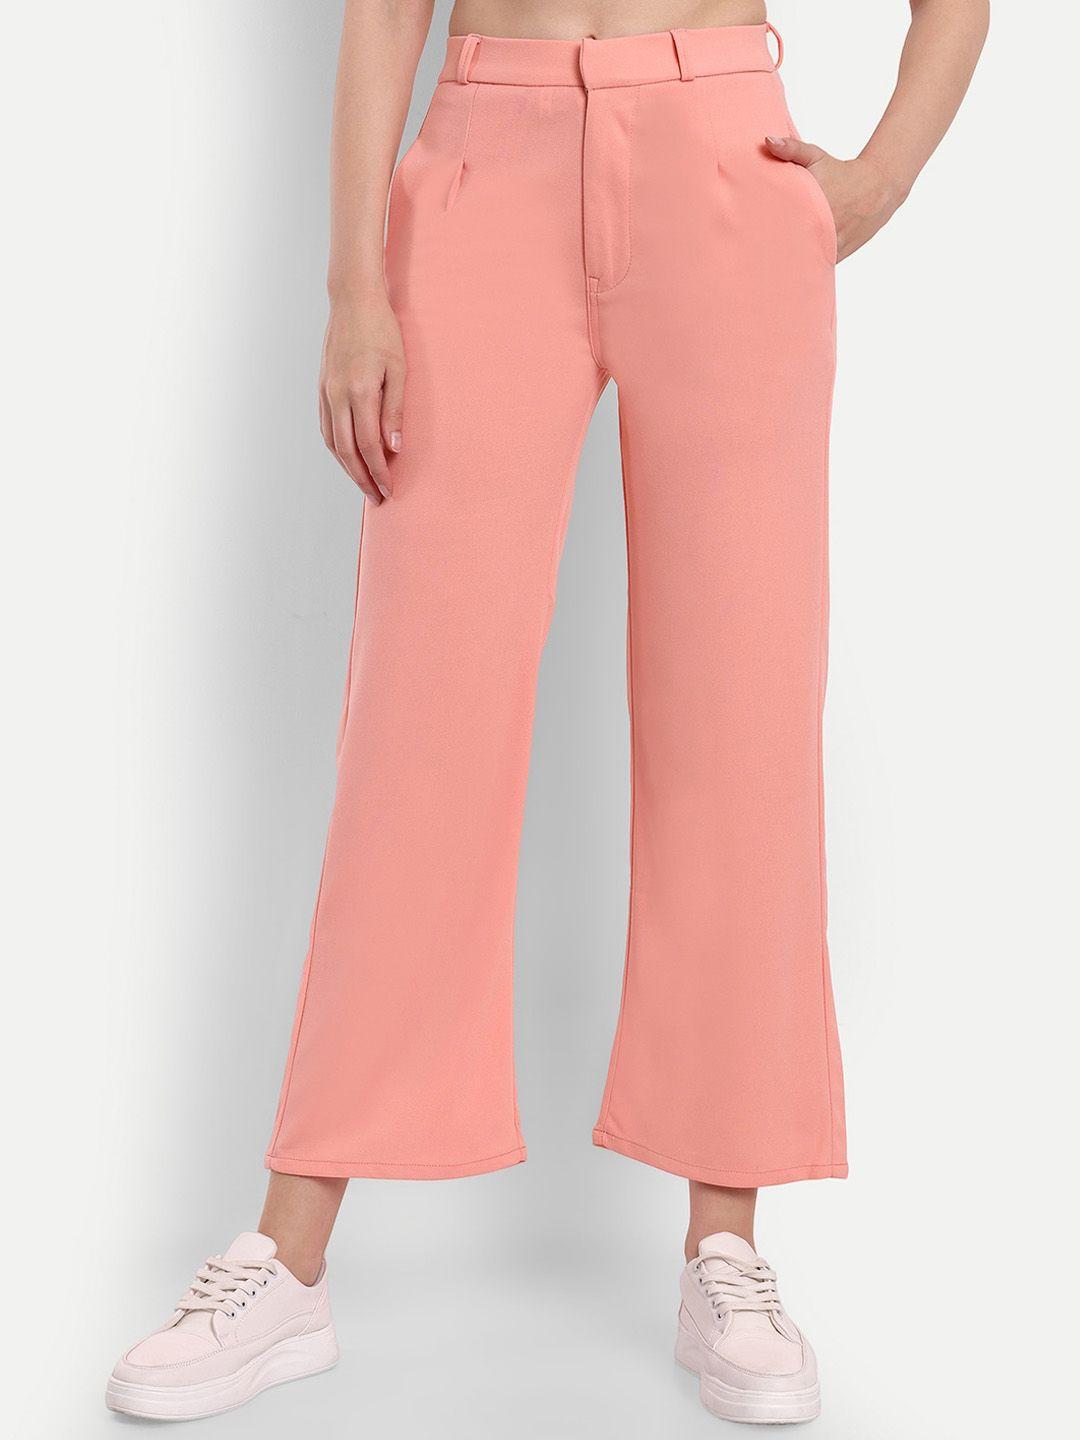 broadstar-women-pink-smart-loose-fit-high-rise-easy-wash-trousers